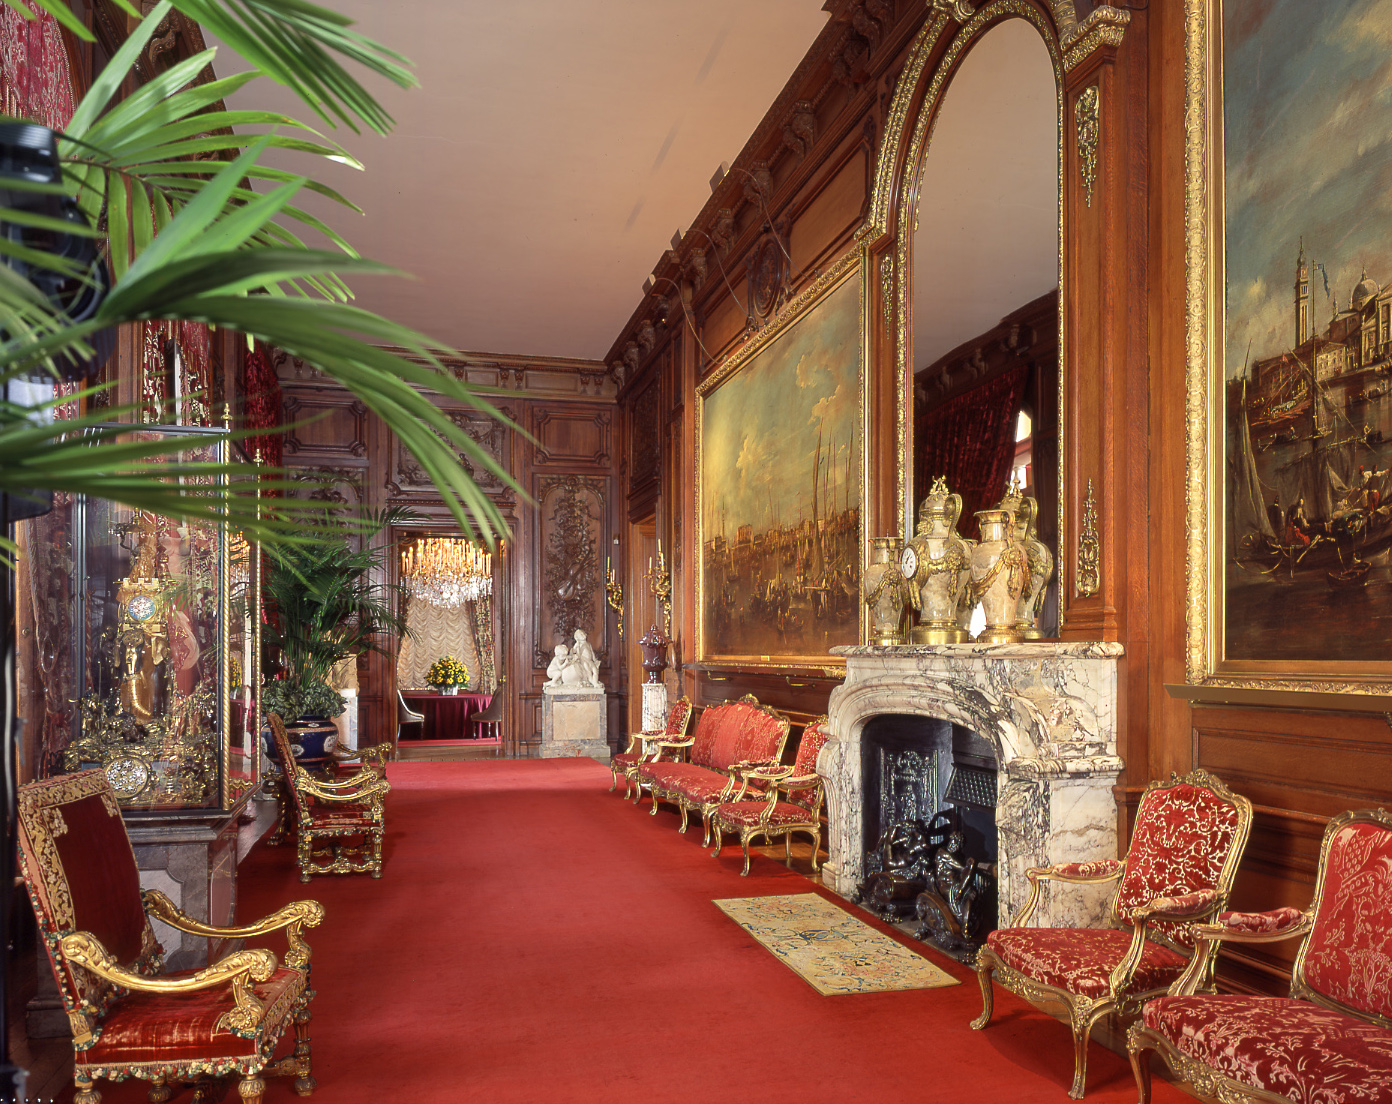 The East Gallery, Waddesdon Manor, The Rothschild Collection (The National Trust). Photo John Bigelow Taylor ©The National Trust, Waddesdon Manor